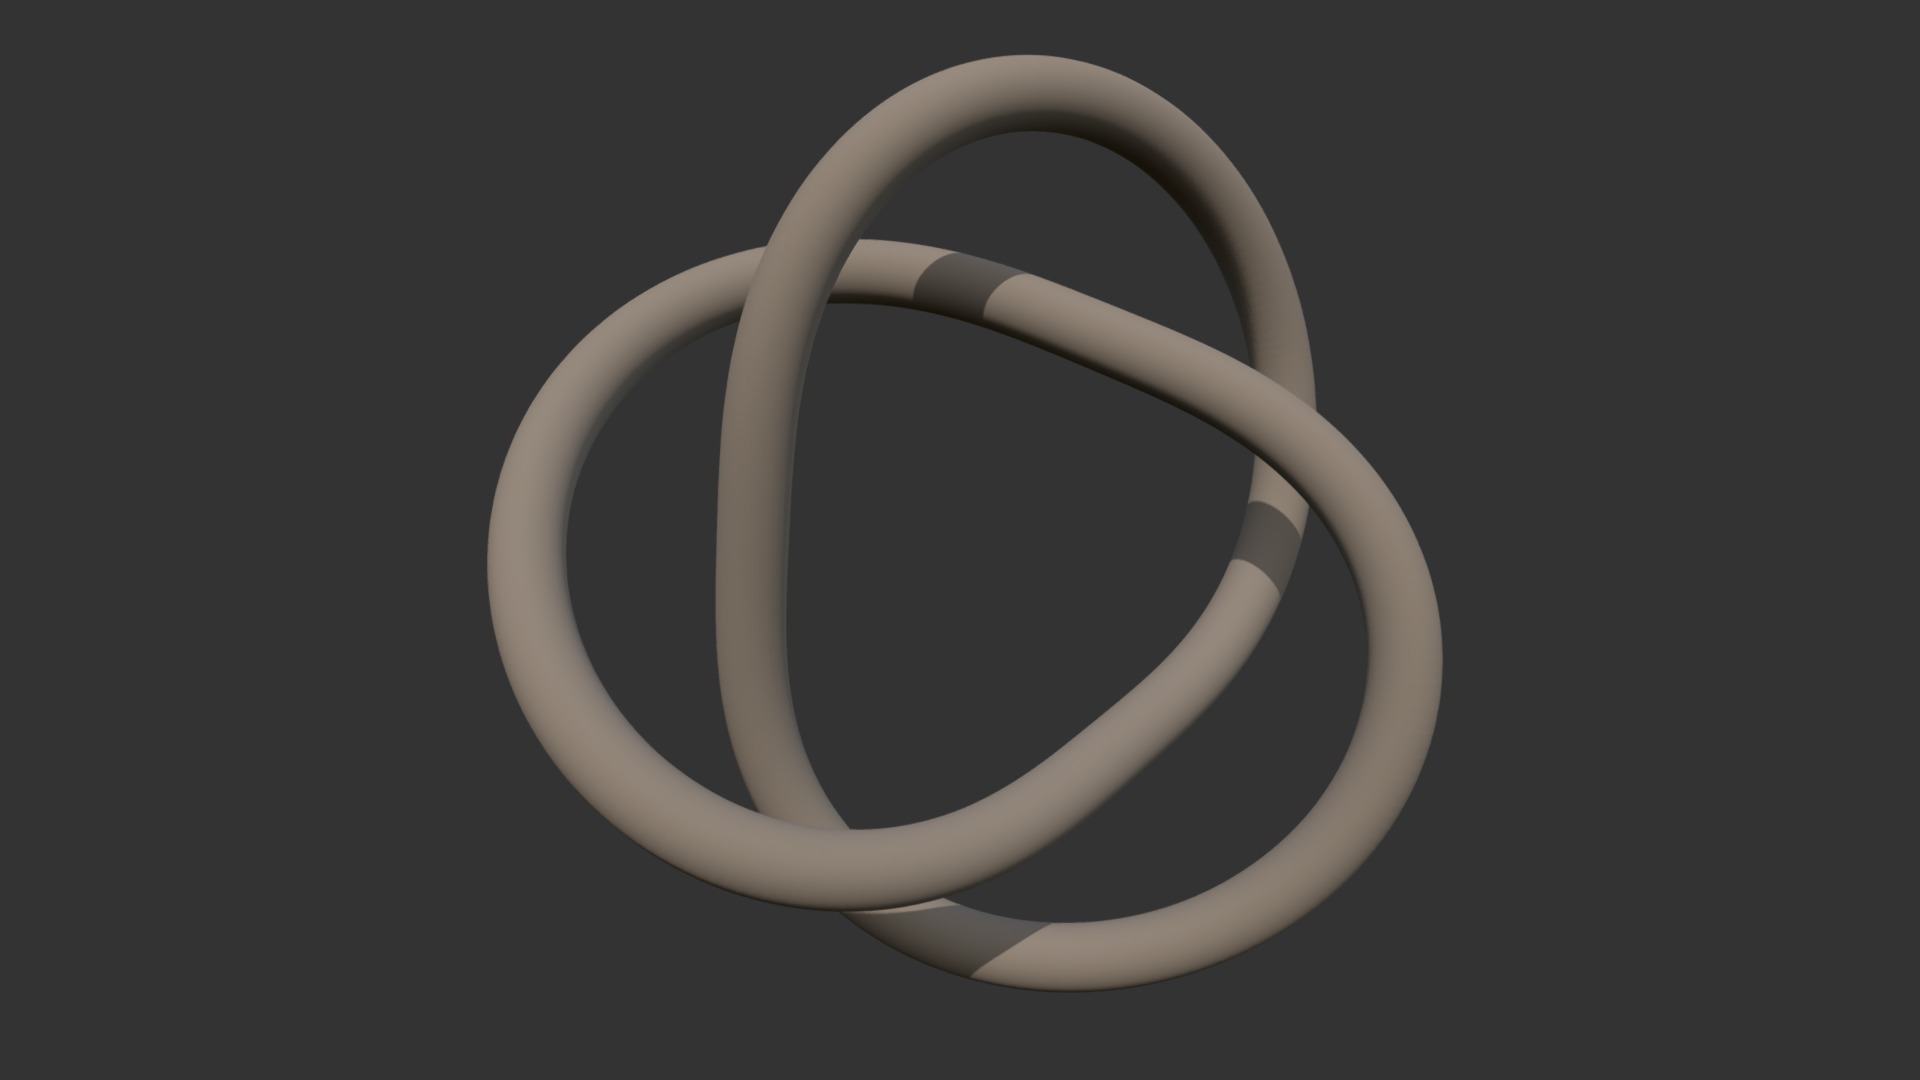 3D model Knot 6 - This is a 3D model of the Knot 6. The 3D model is about a white ring with a black background.